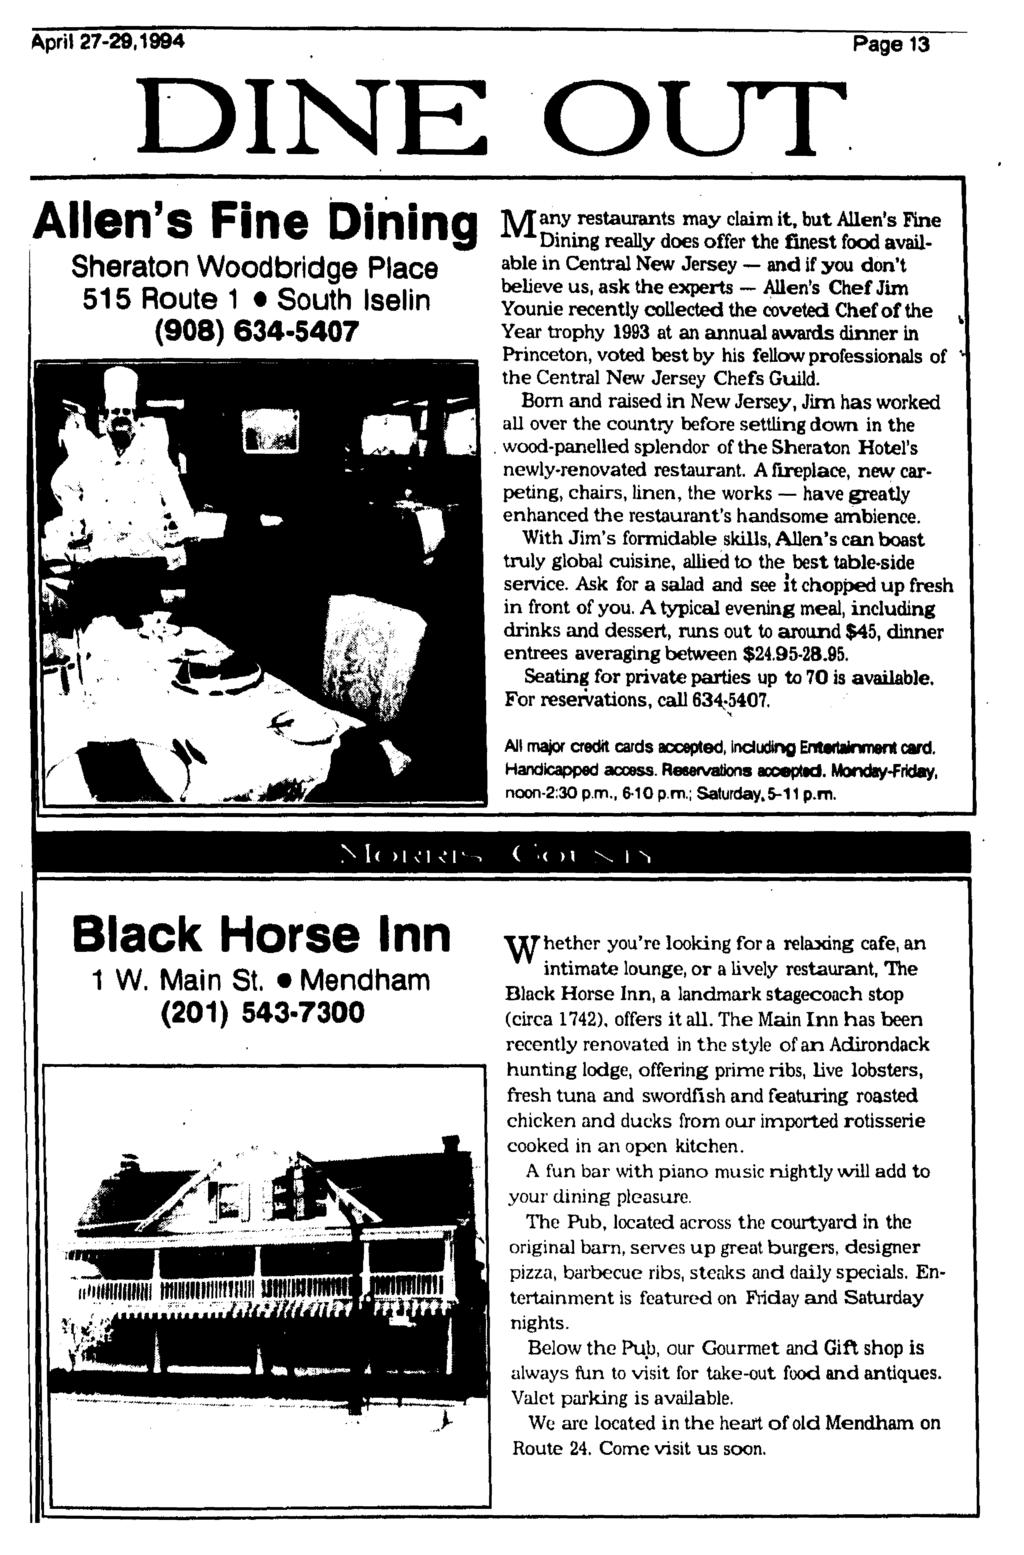 April 27-20,1994 Page 13 DINE Allen's Fine Dining Sheraton Woodbridge Place 515 Route 1 South Iselin (908) 634-5407 OUT TWTany restaurants may claim it, but Allen's Fine Dining really does offer the